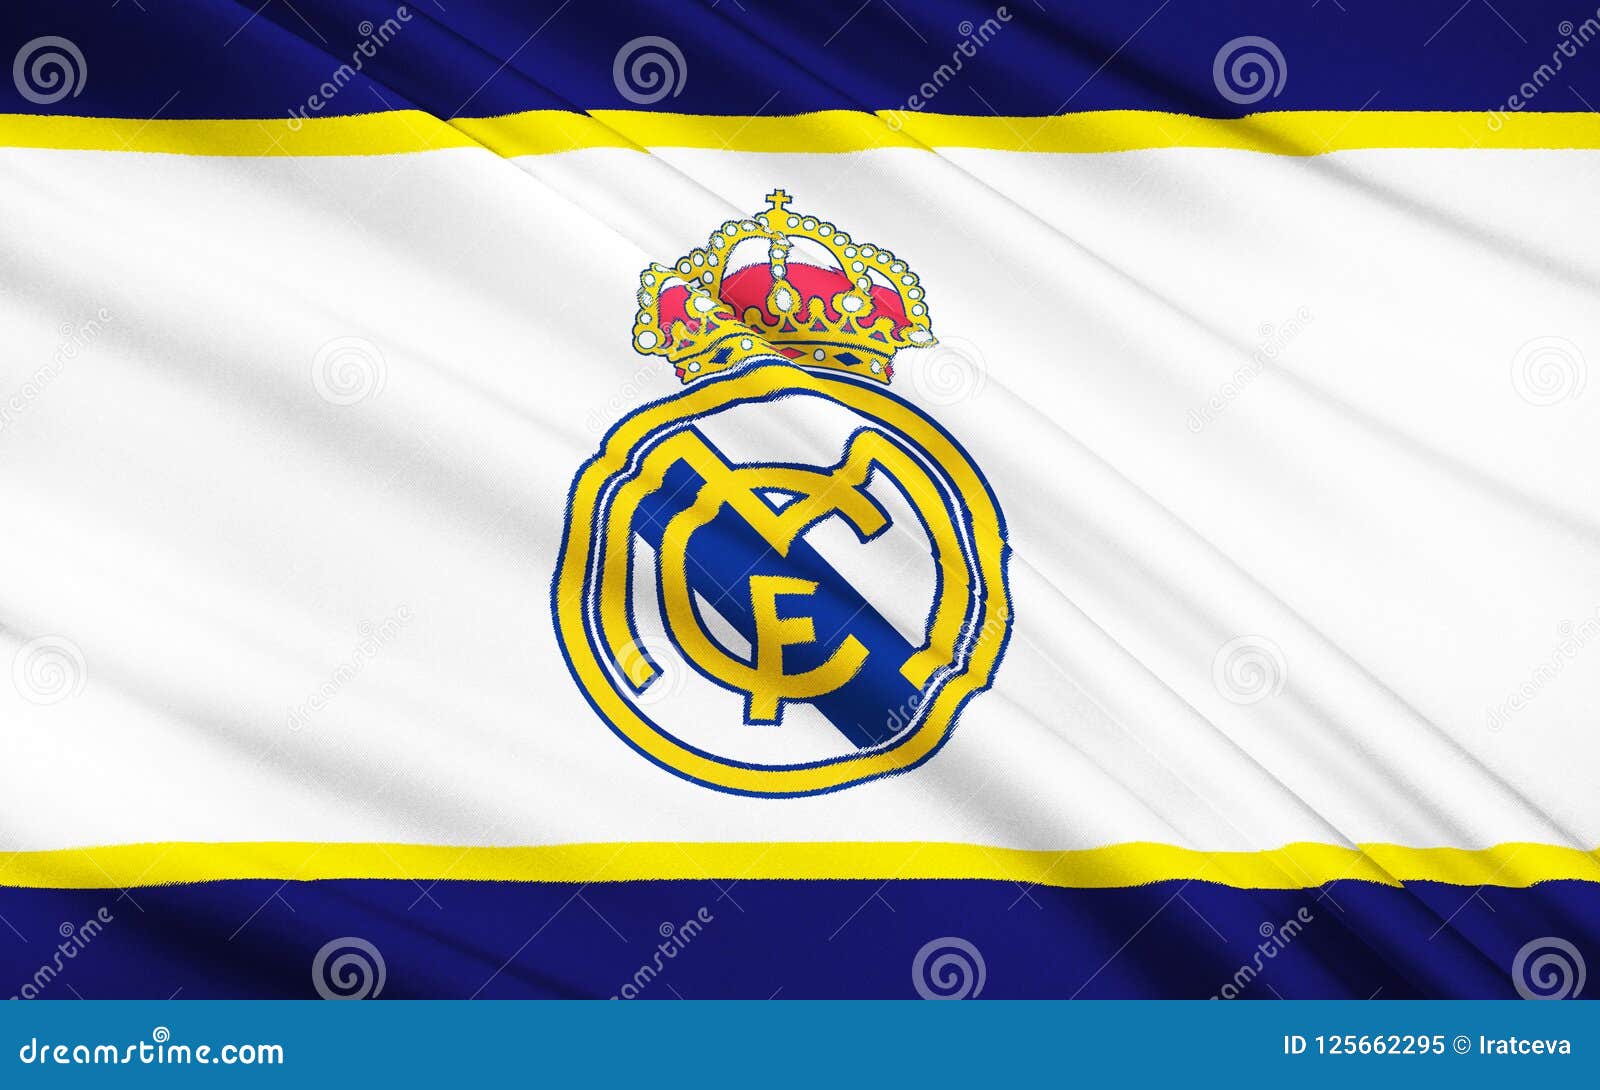 Flag Football Club Real Madrid Editorial Image - Image of background,  banner: 125662295